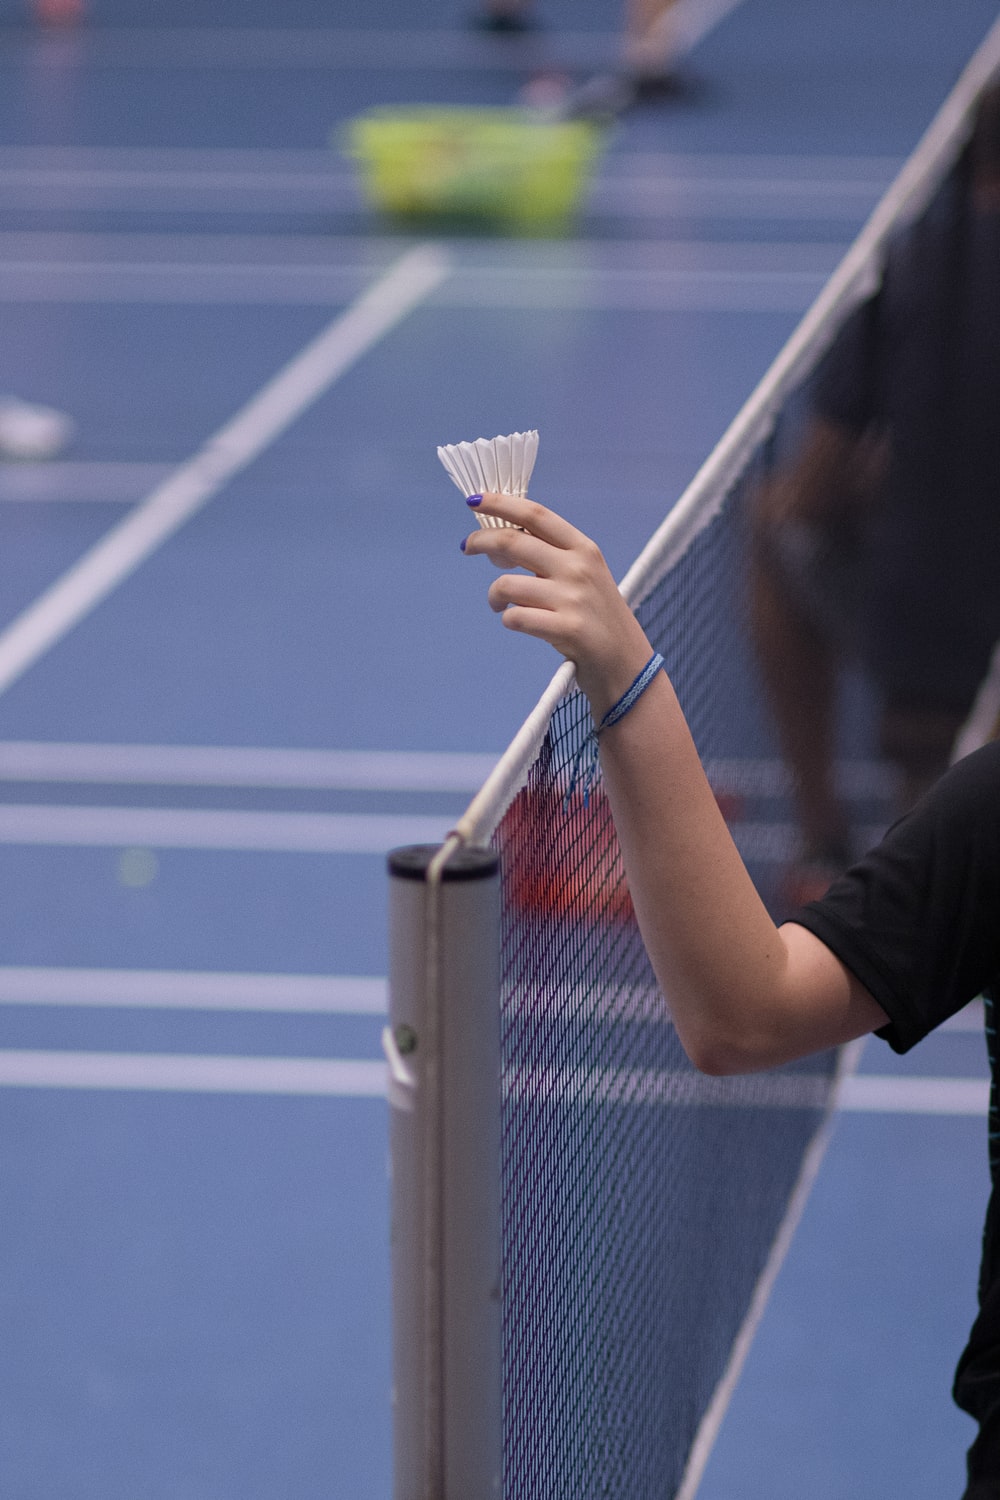 Badminton Court Picture. Download Free Image